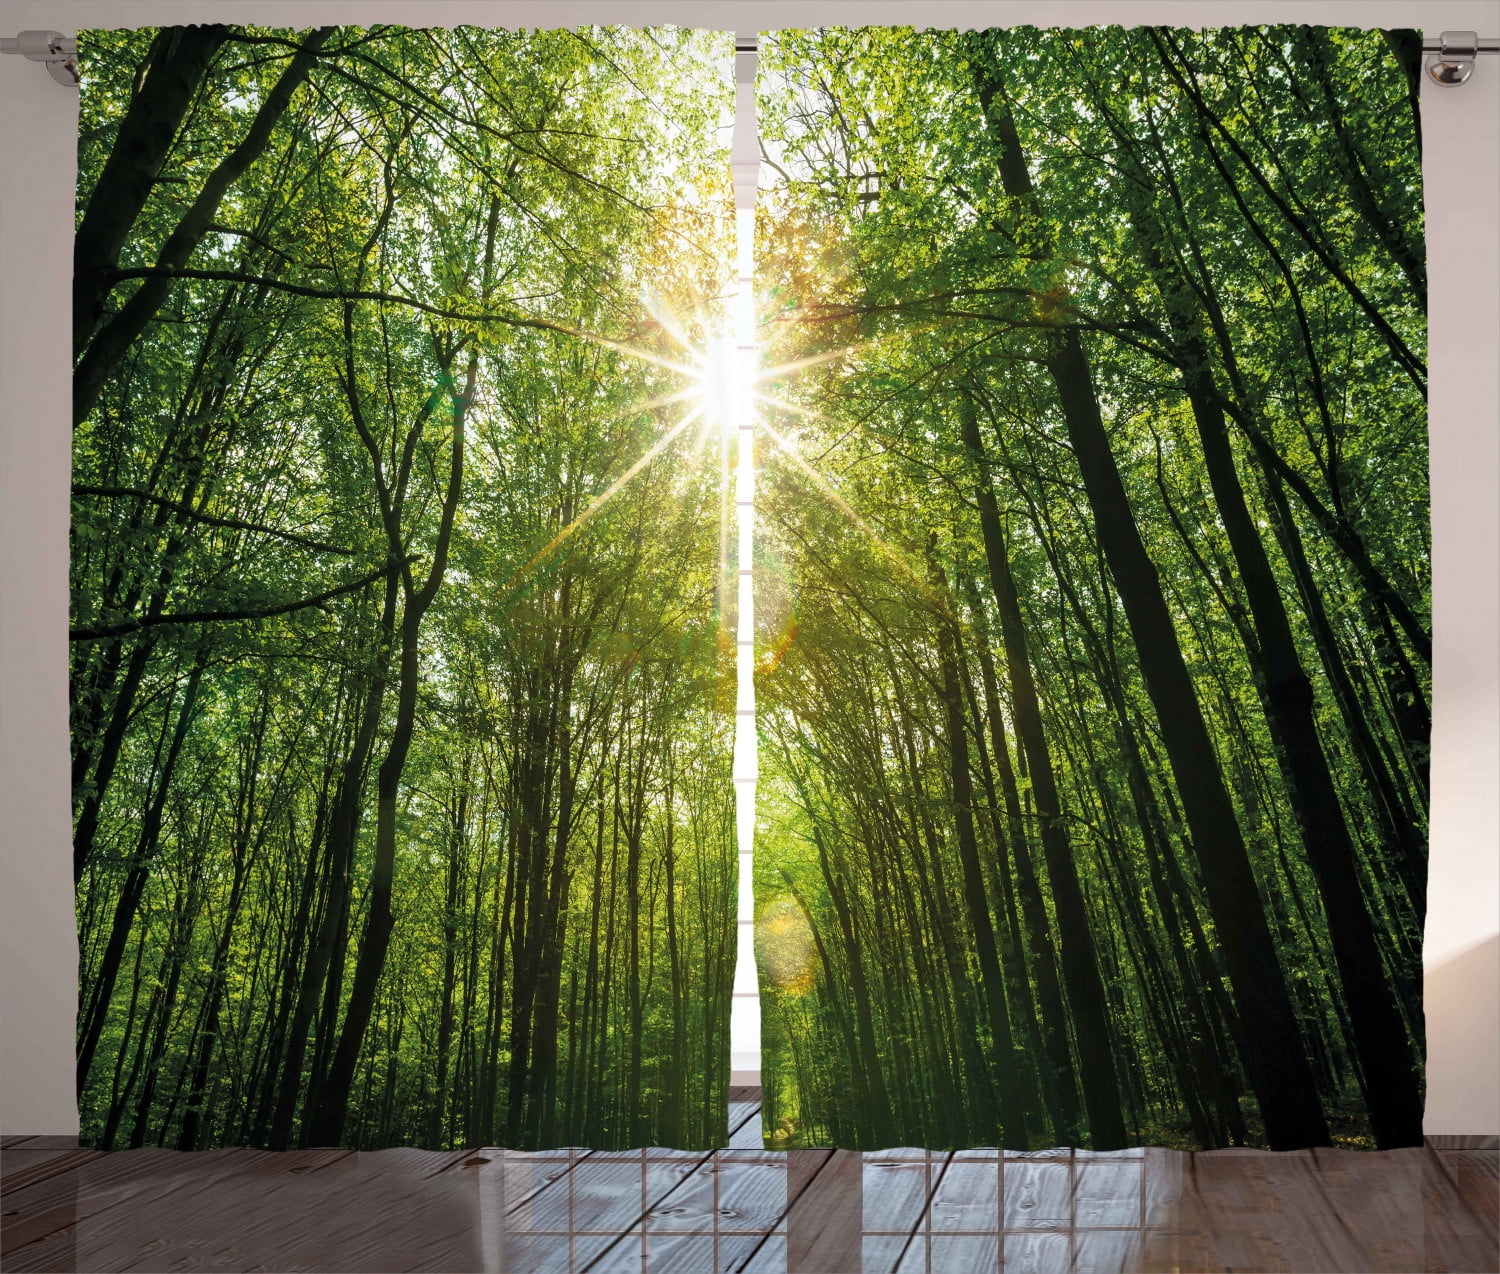 Details about   2 Panels Forest Scenery Window Curtains Blackout Window Drapes Living Room Decor 